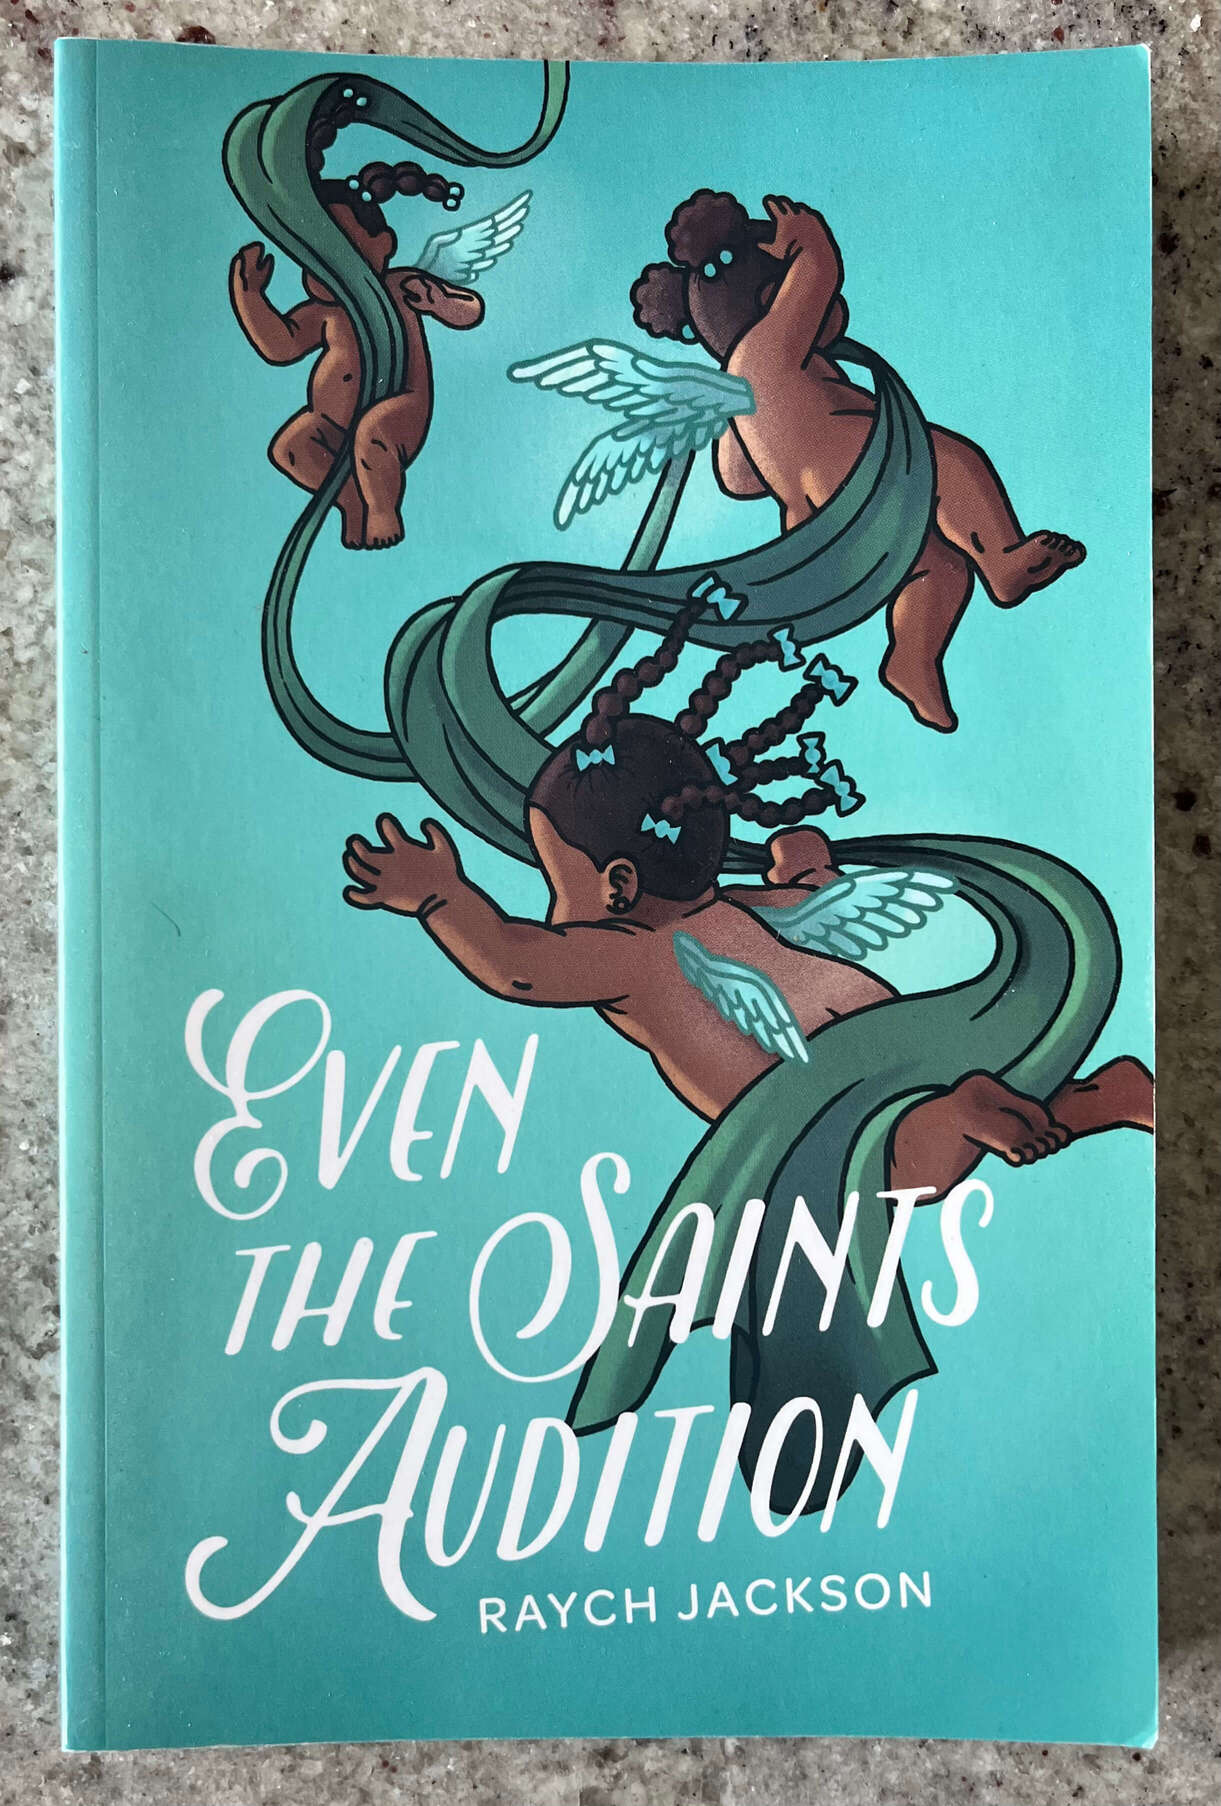 “Even the Saints Audition” by Raych Jackson.